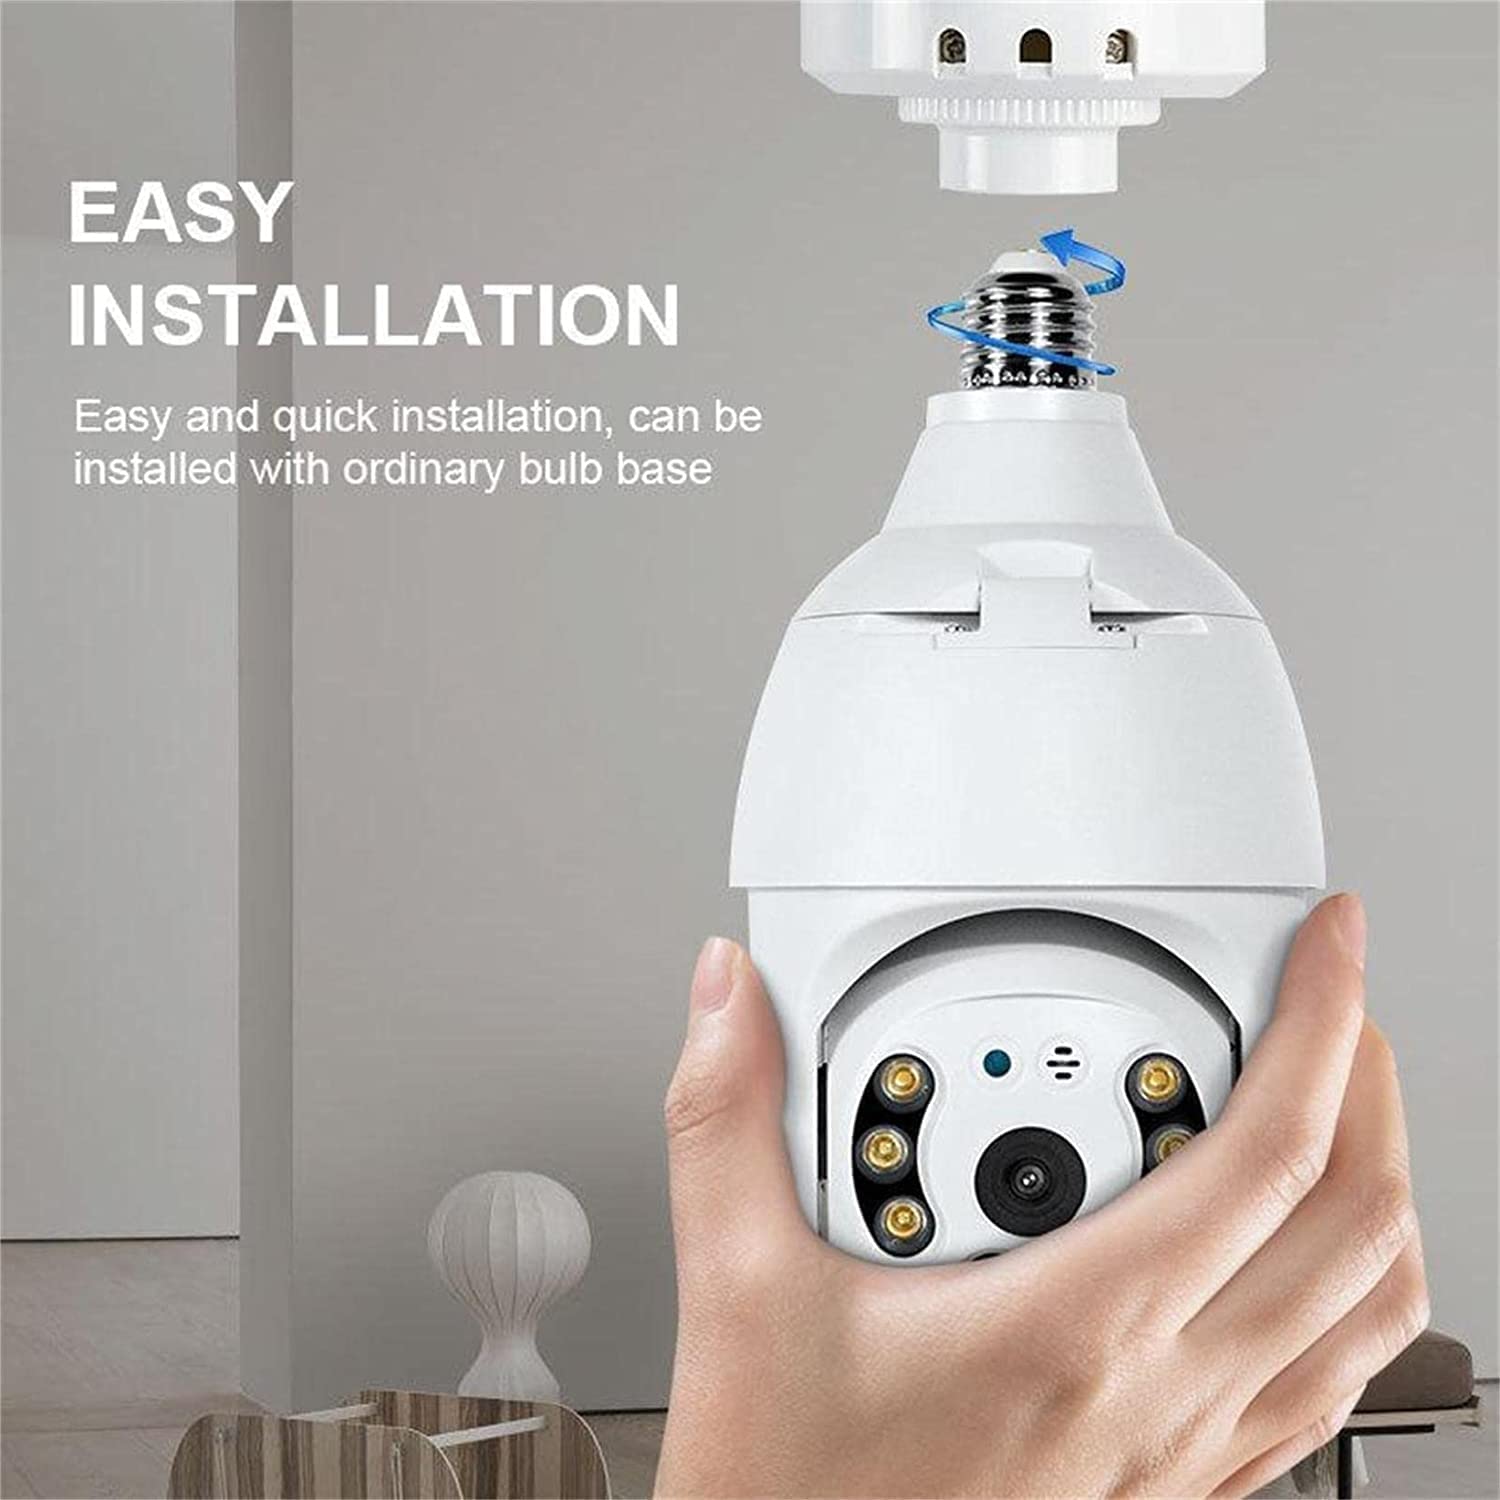 Pack of 2 Light Bulb1080P Security Cameras Wireless Outdoor 5GHz & 2.4GHz Wireless WiFi Smart 360 Cameras for Home Security, Indoor and Outdoor Light Socket Camera, Motion Detection and Alerts